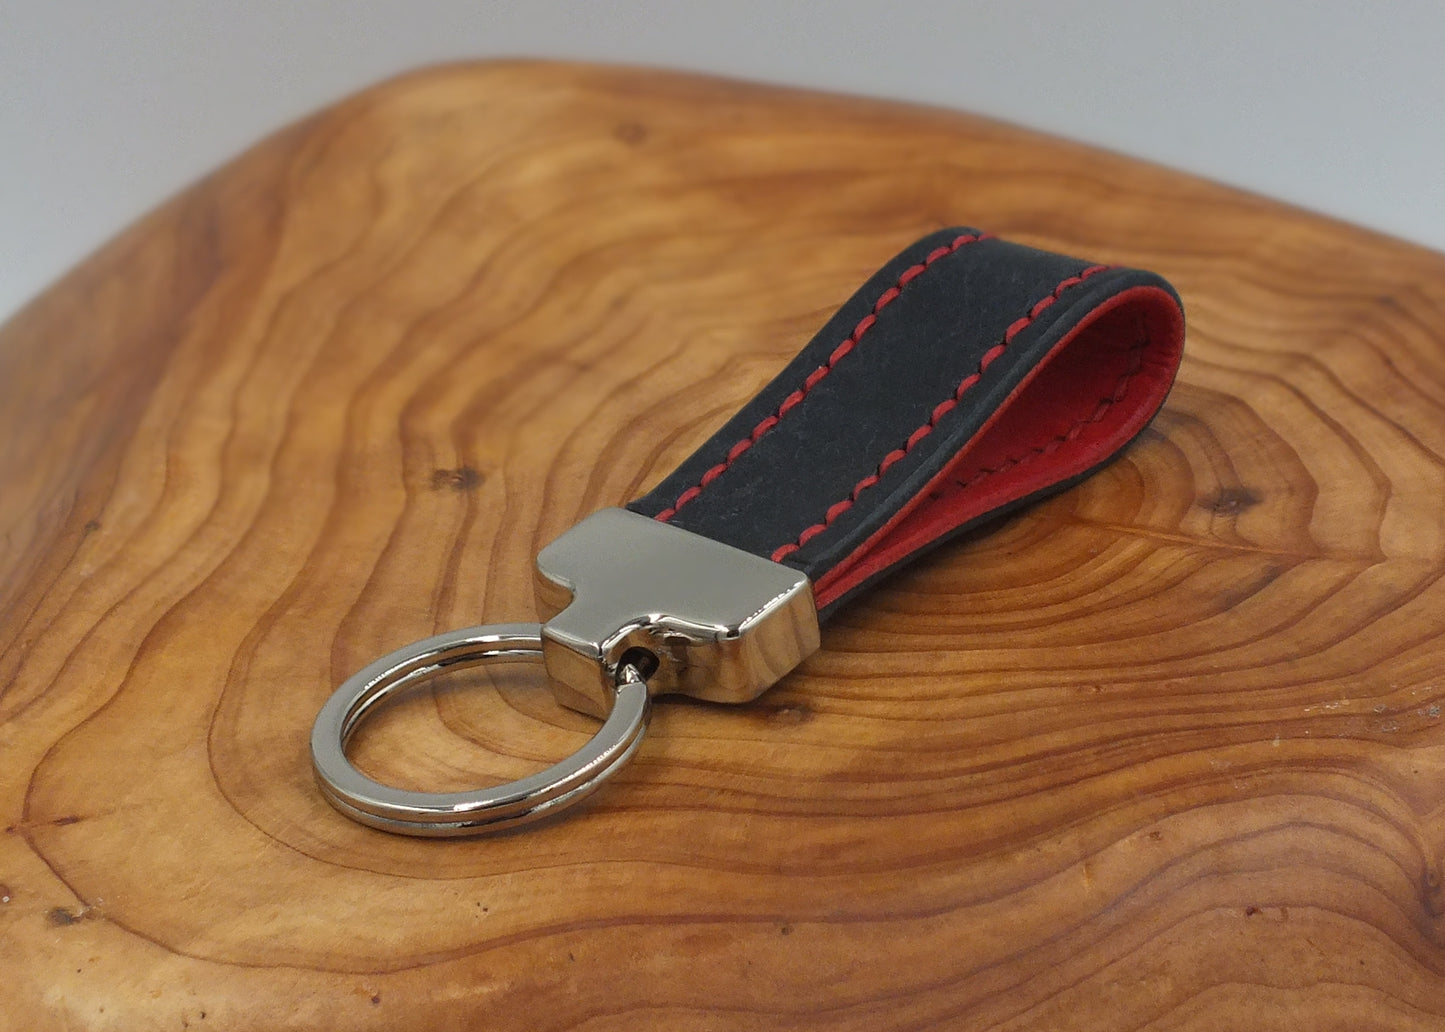 The Caeg - Red/Blue Leather Key Fob